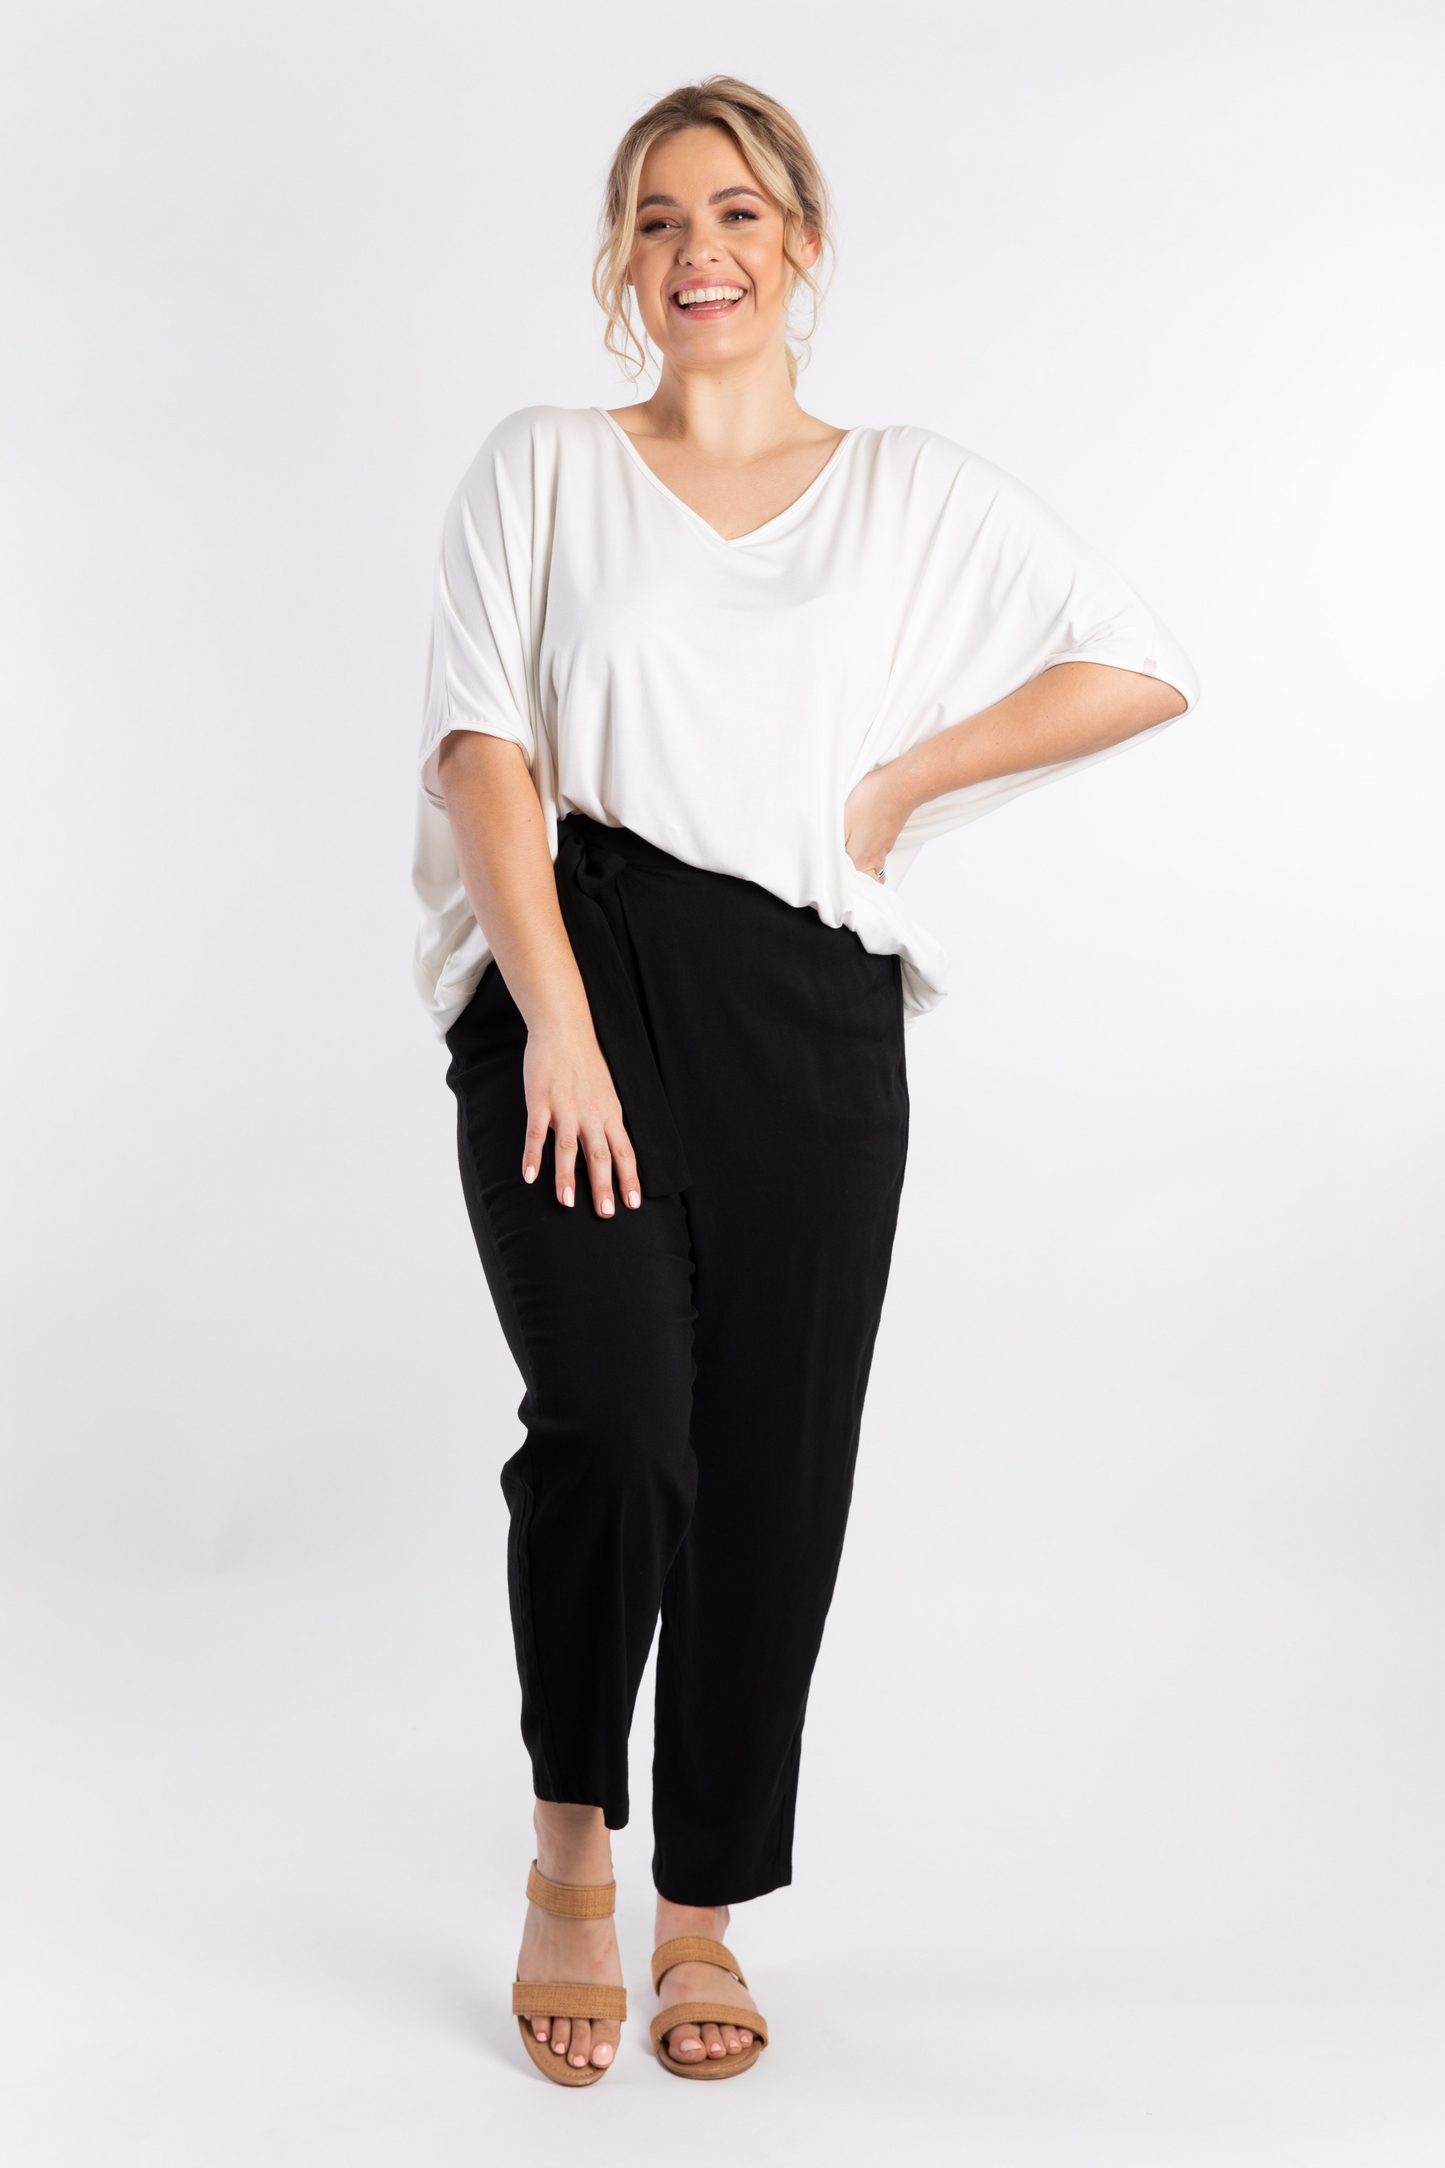 Melody Pleat Pant in Black